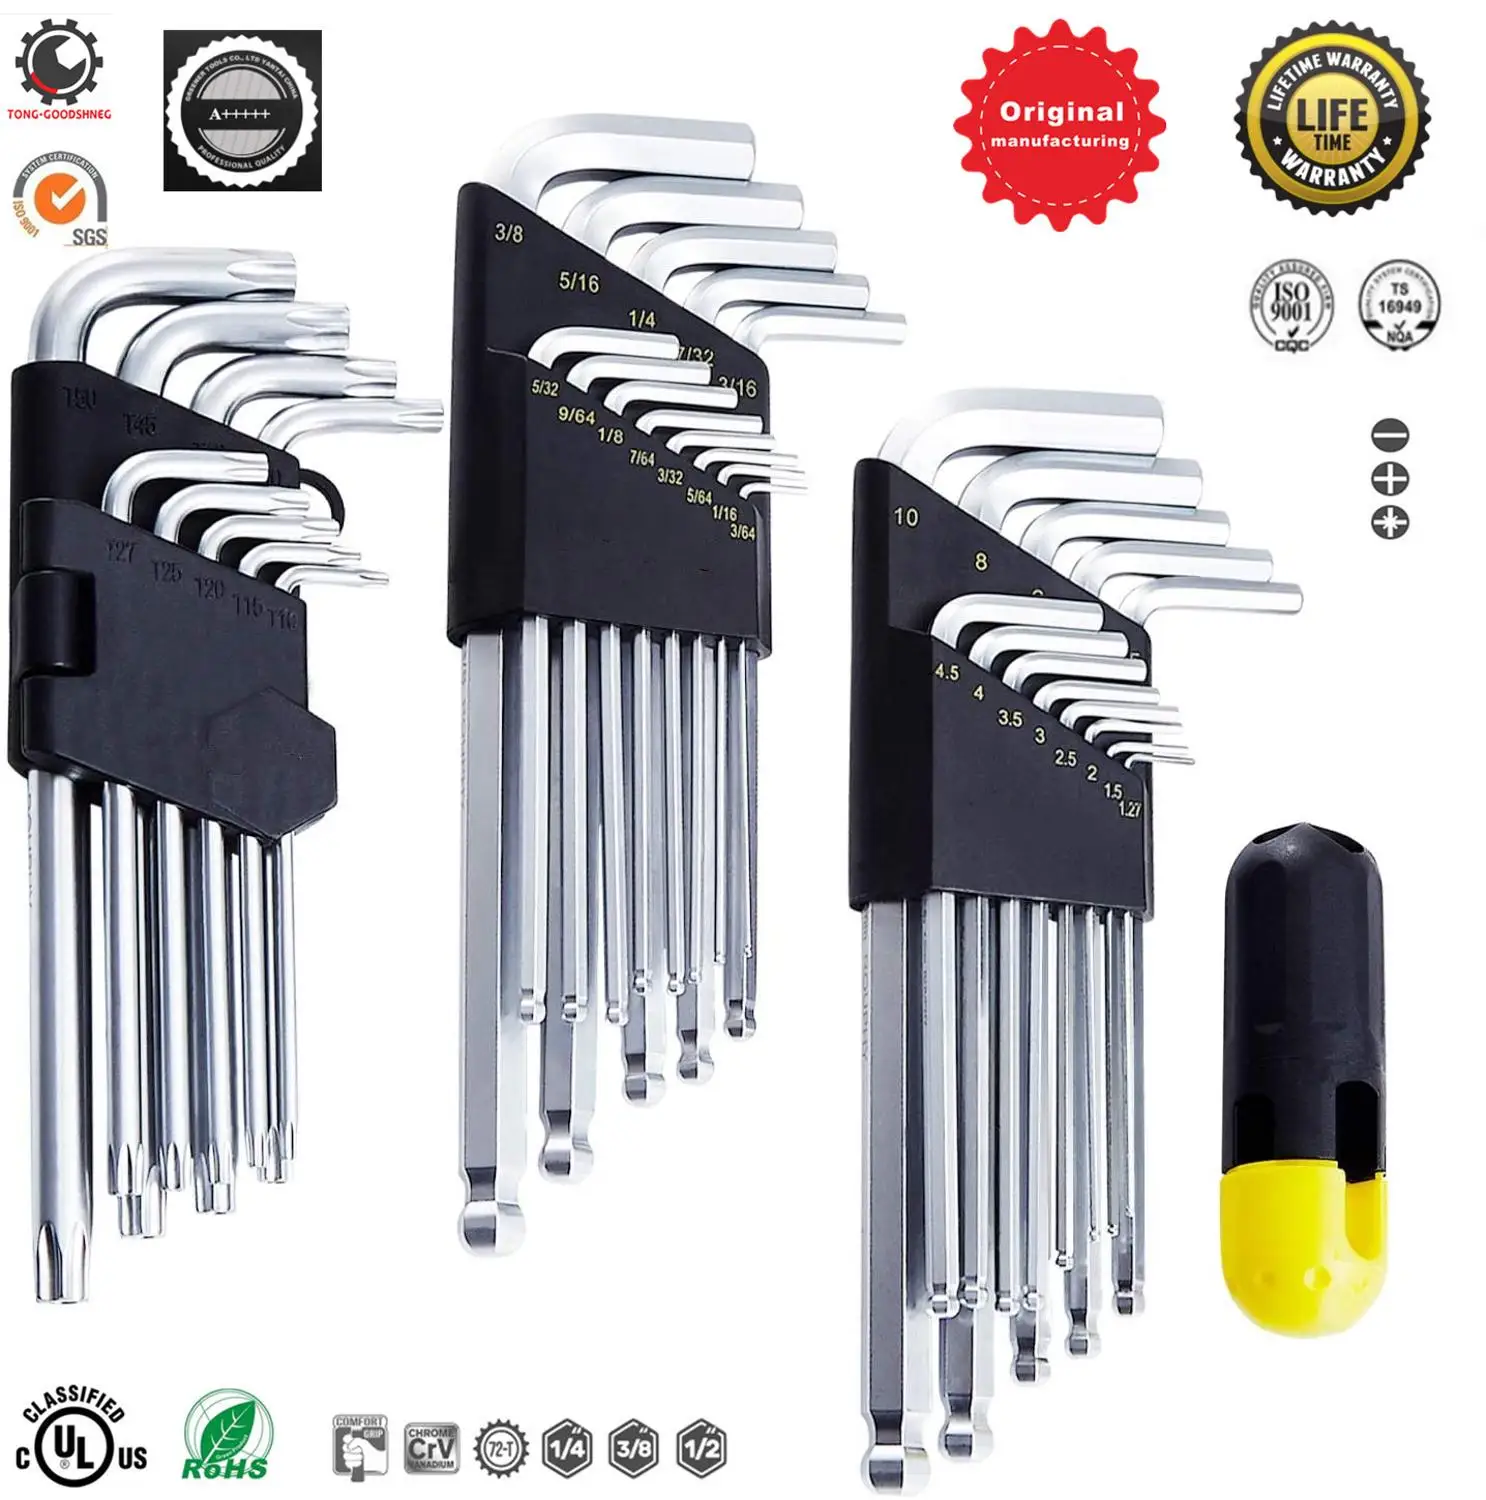 SAE & Metric,S2 Steel,Pearl Nickel Surface,Gift for men KATA 18PCS Hex Key Allen Wrench Set,Long Arm Ball End Allen Wrench 